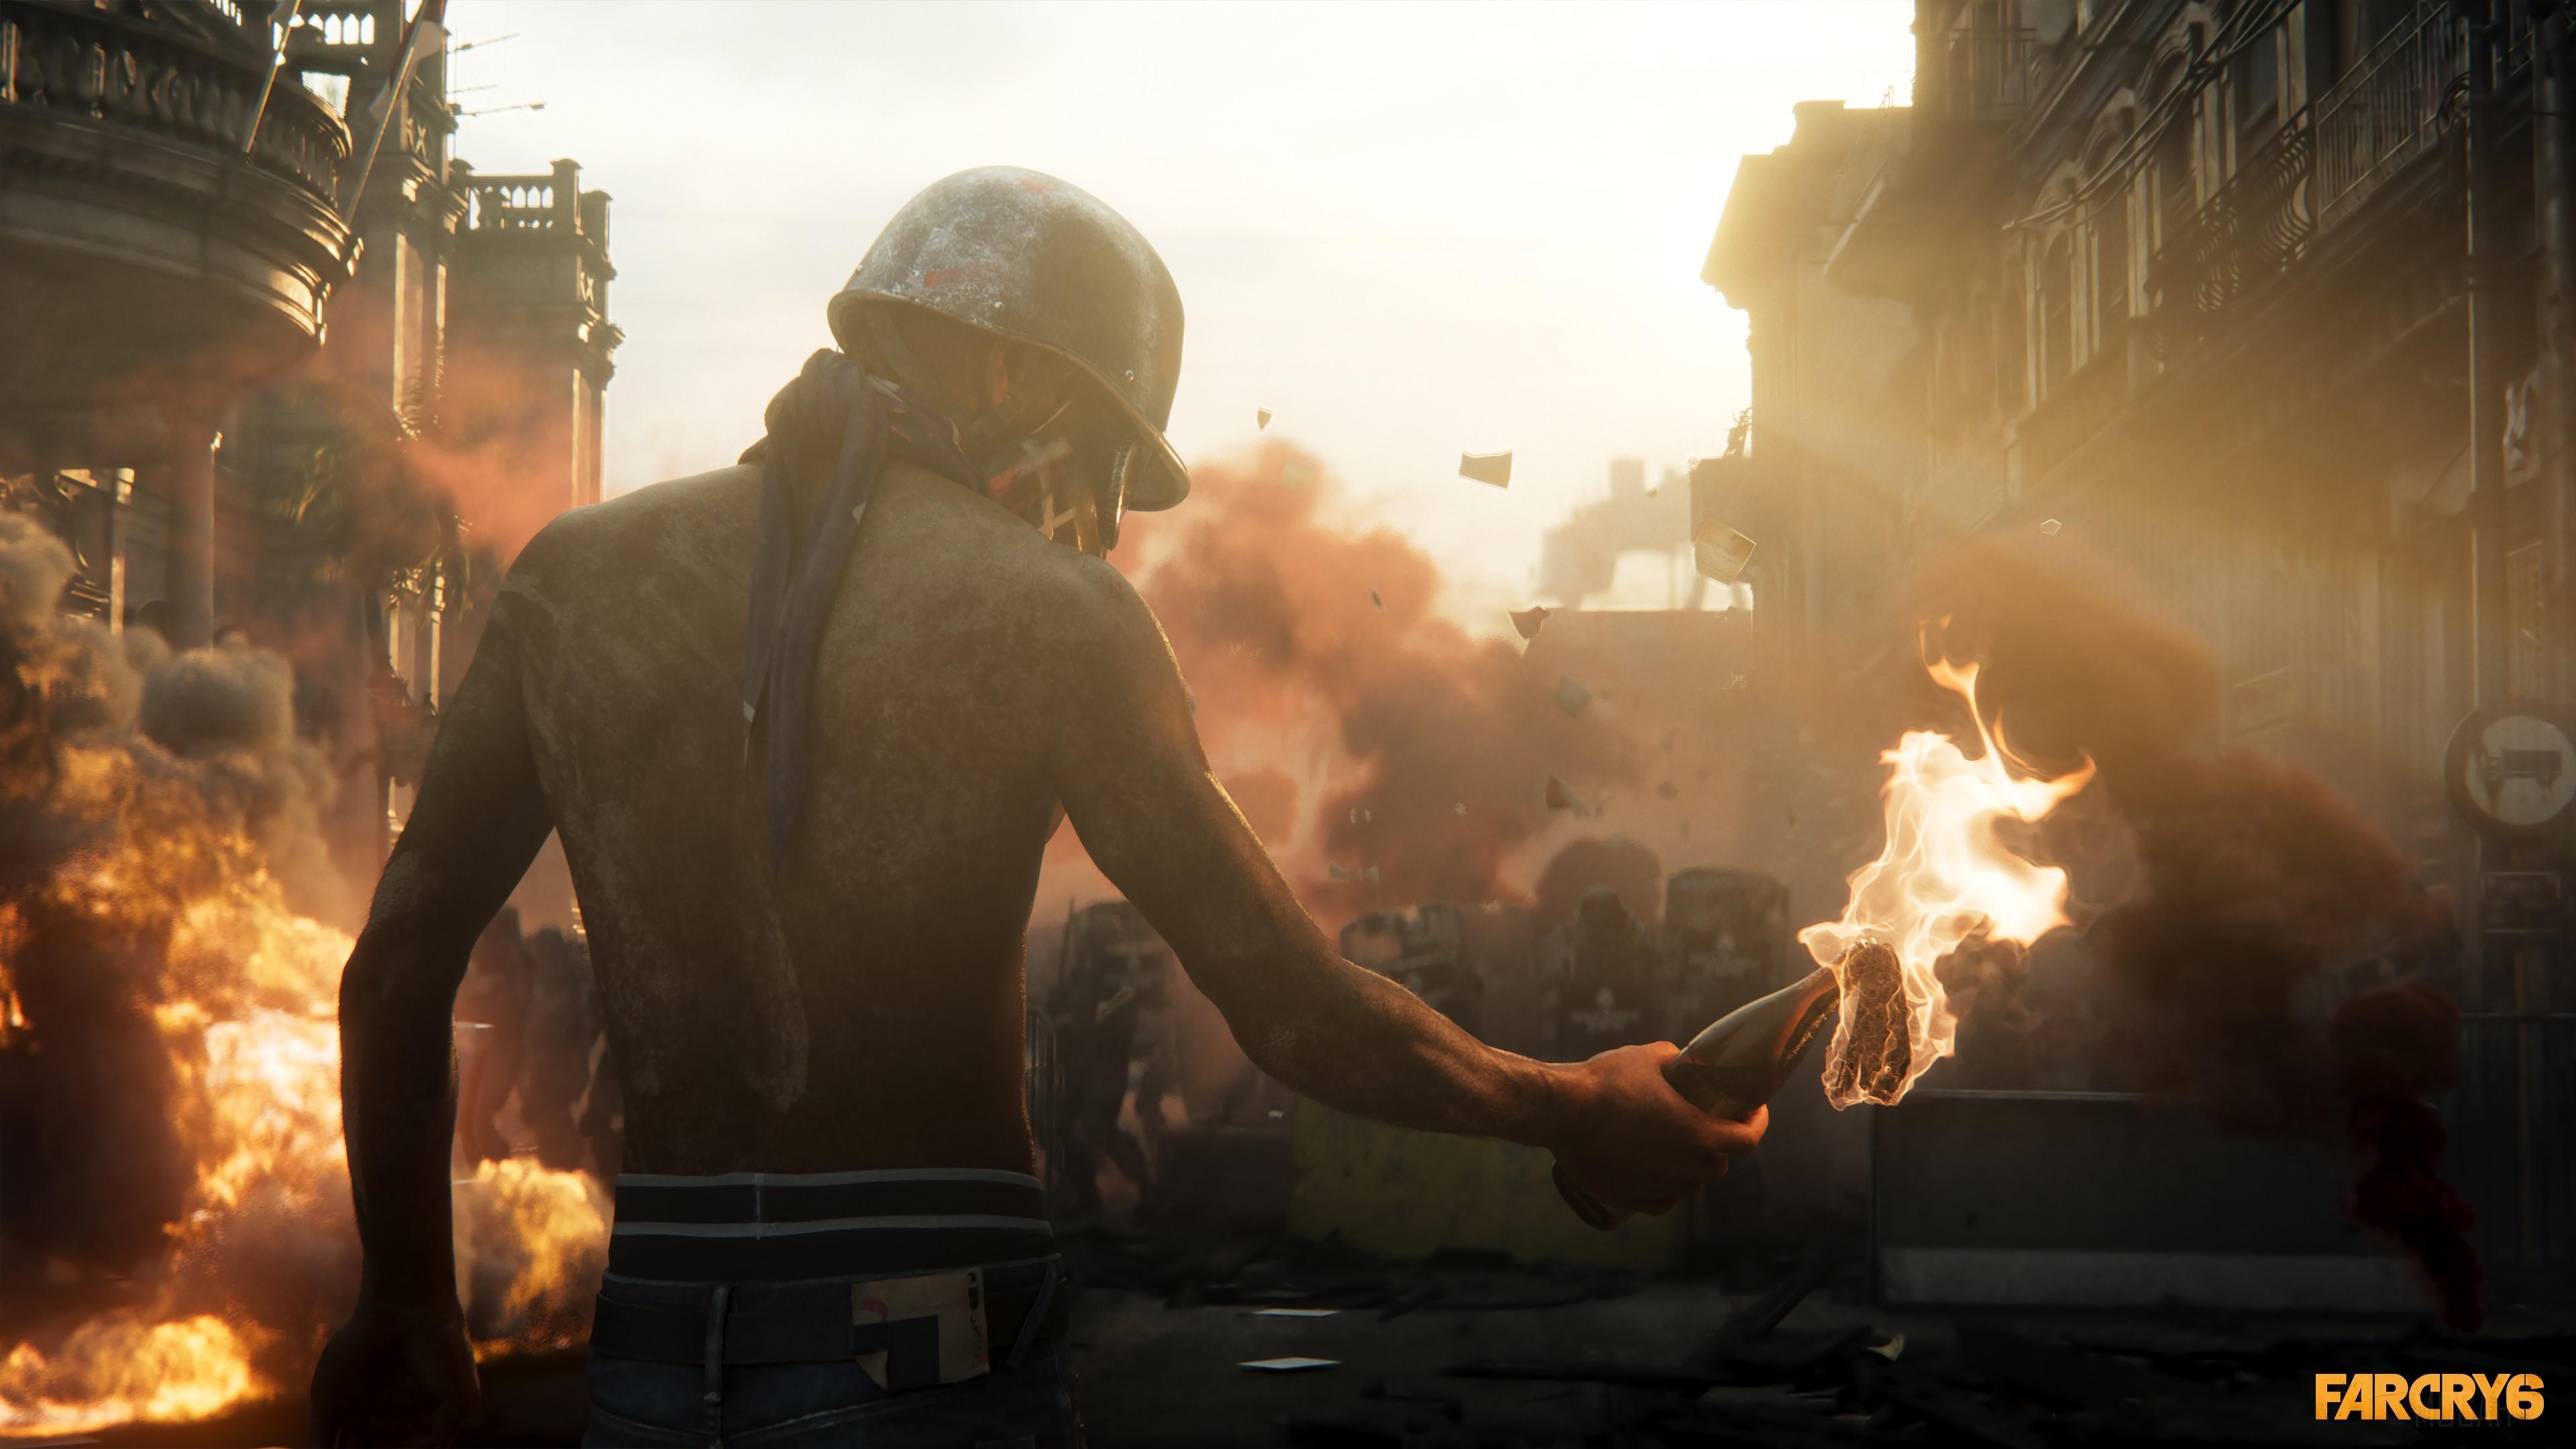 HD wallpaper, Molotov Cocktail 4K, City, Far Cry 6, Video Game, Burning